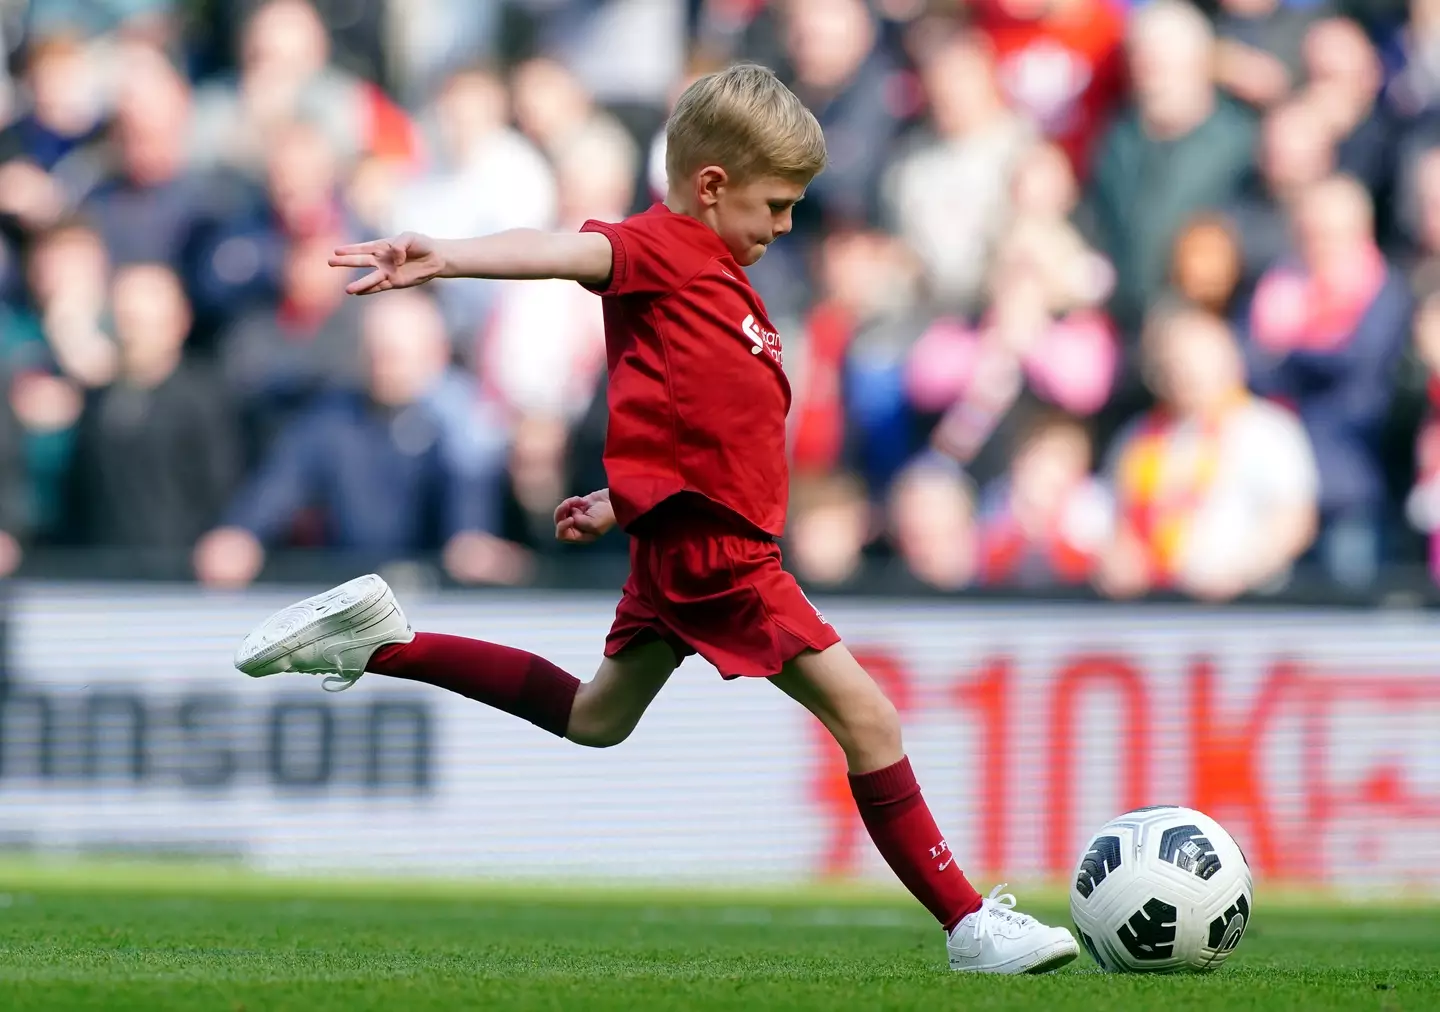 Lio Gerrard took a penalty at half-time this afternoon. (